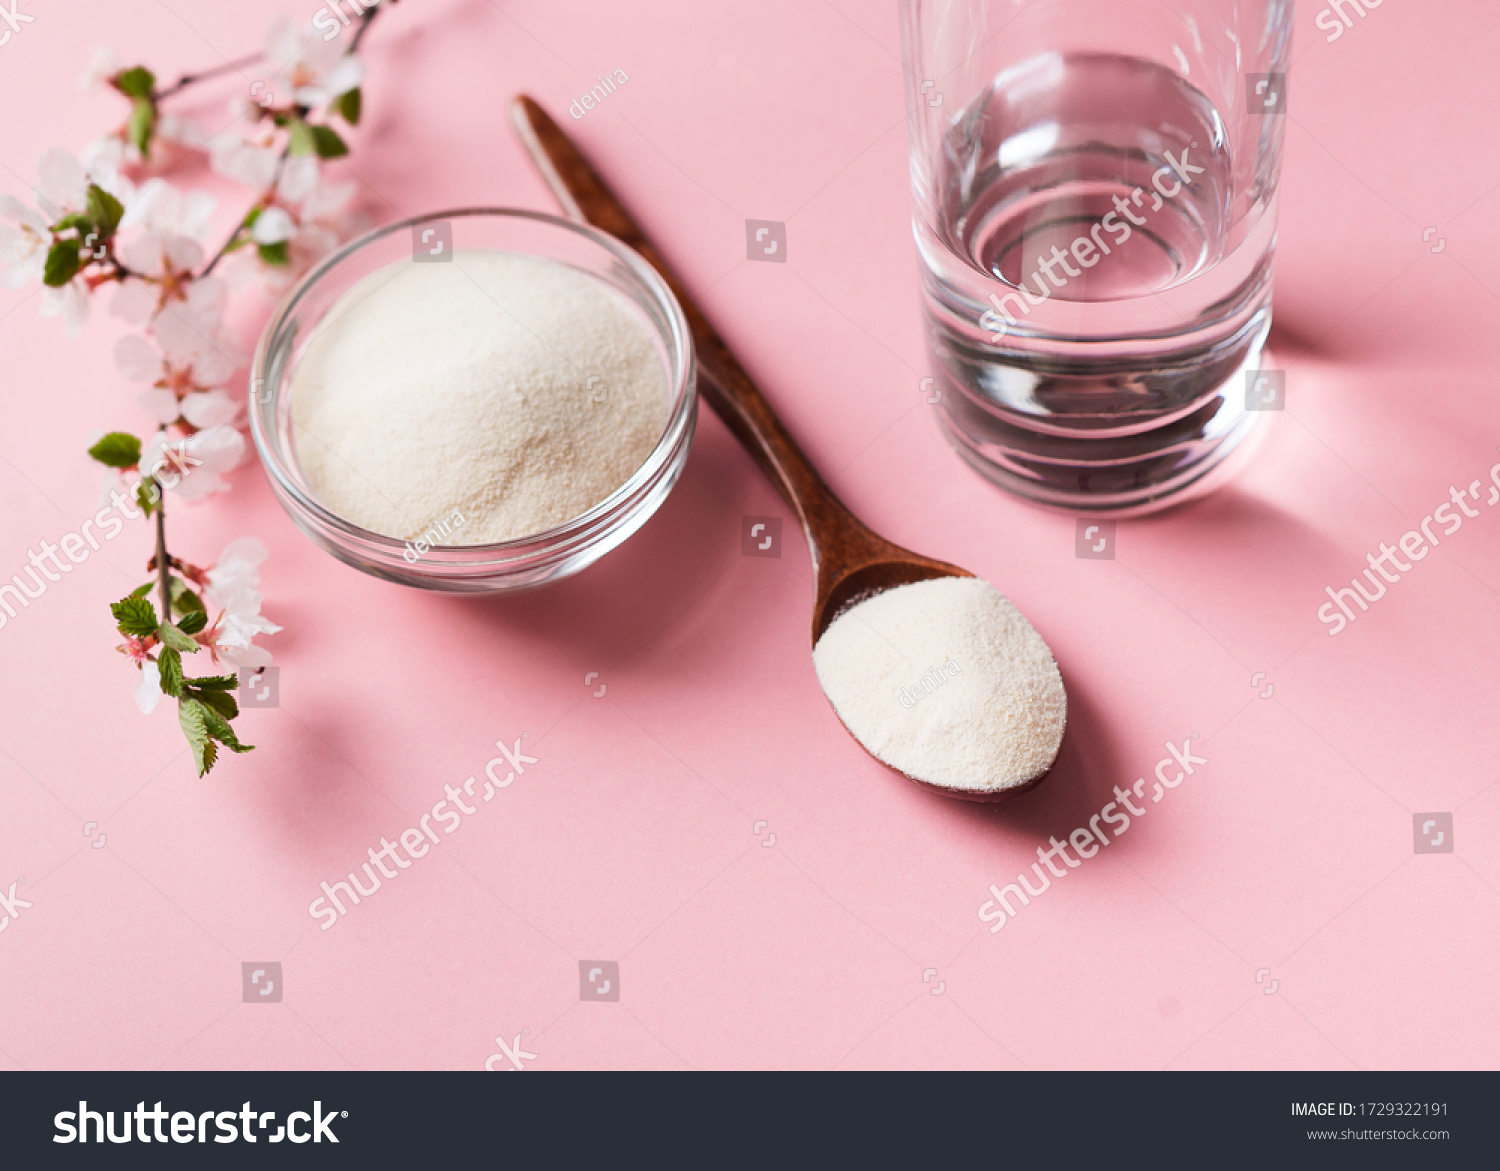 Collagen powder in wooden spoon, supplement with galss of water and flowers, healthy and anti age concept  on pink background, top view, copy space #1729322191